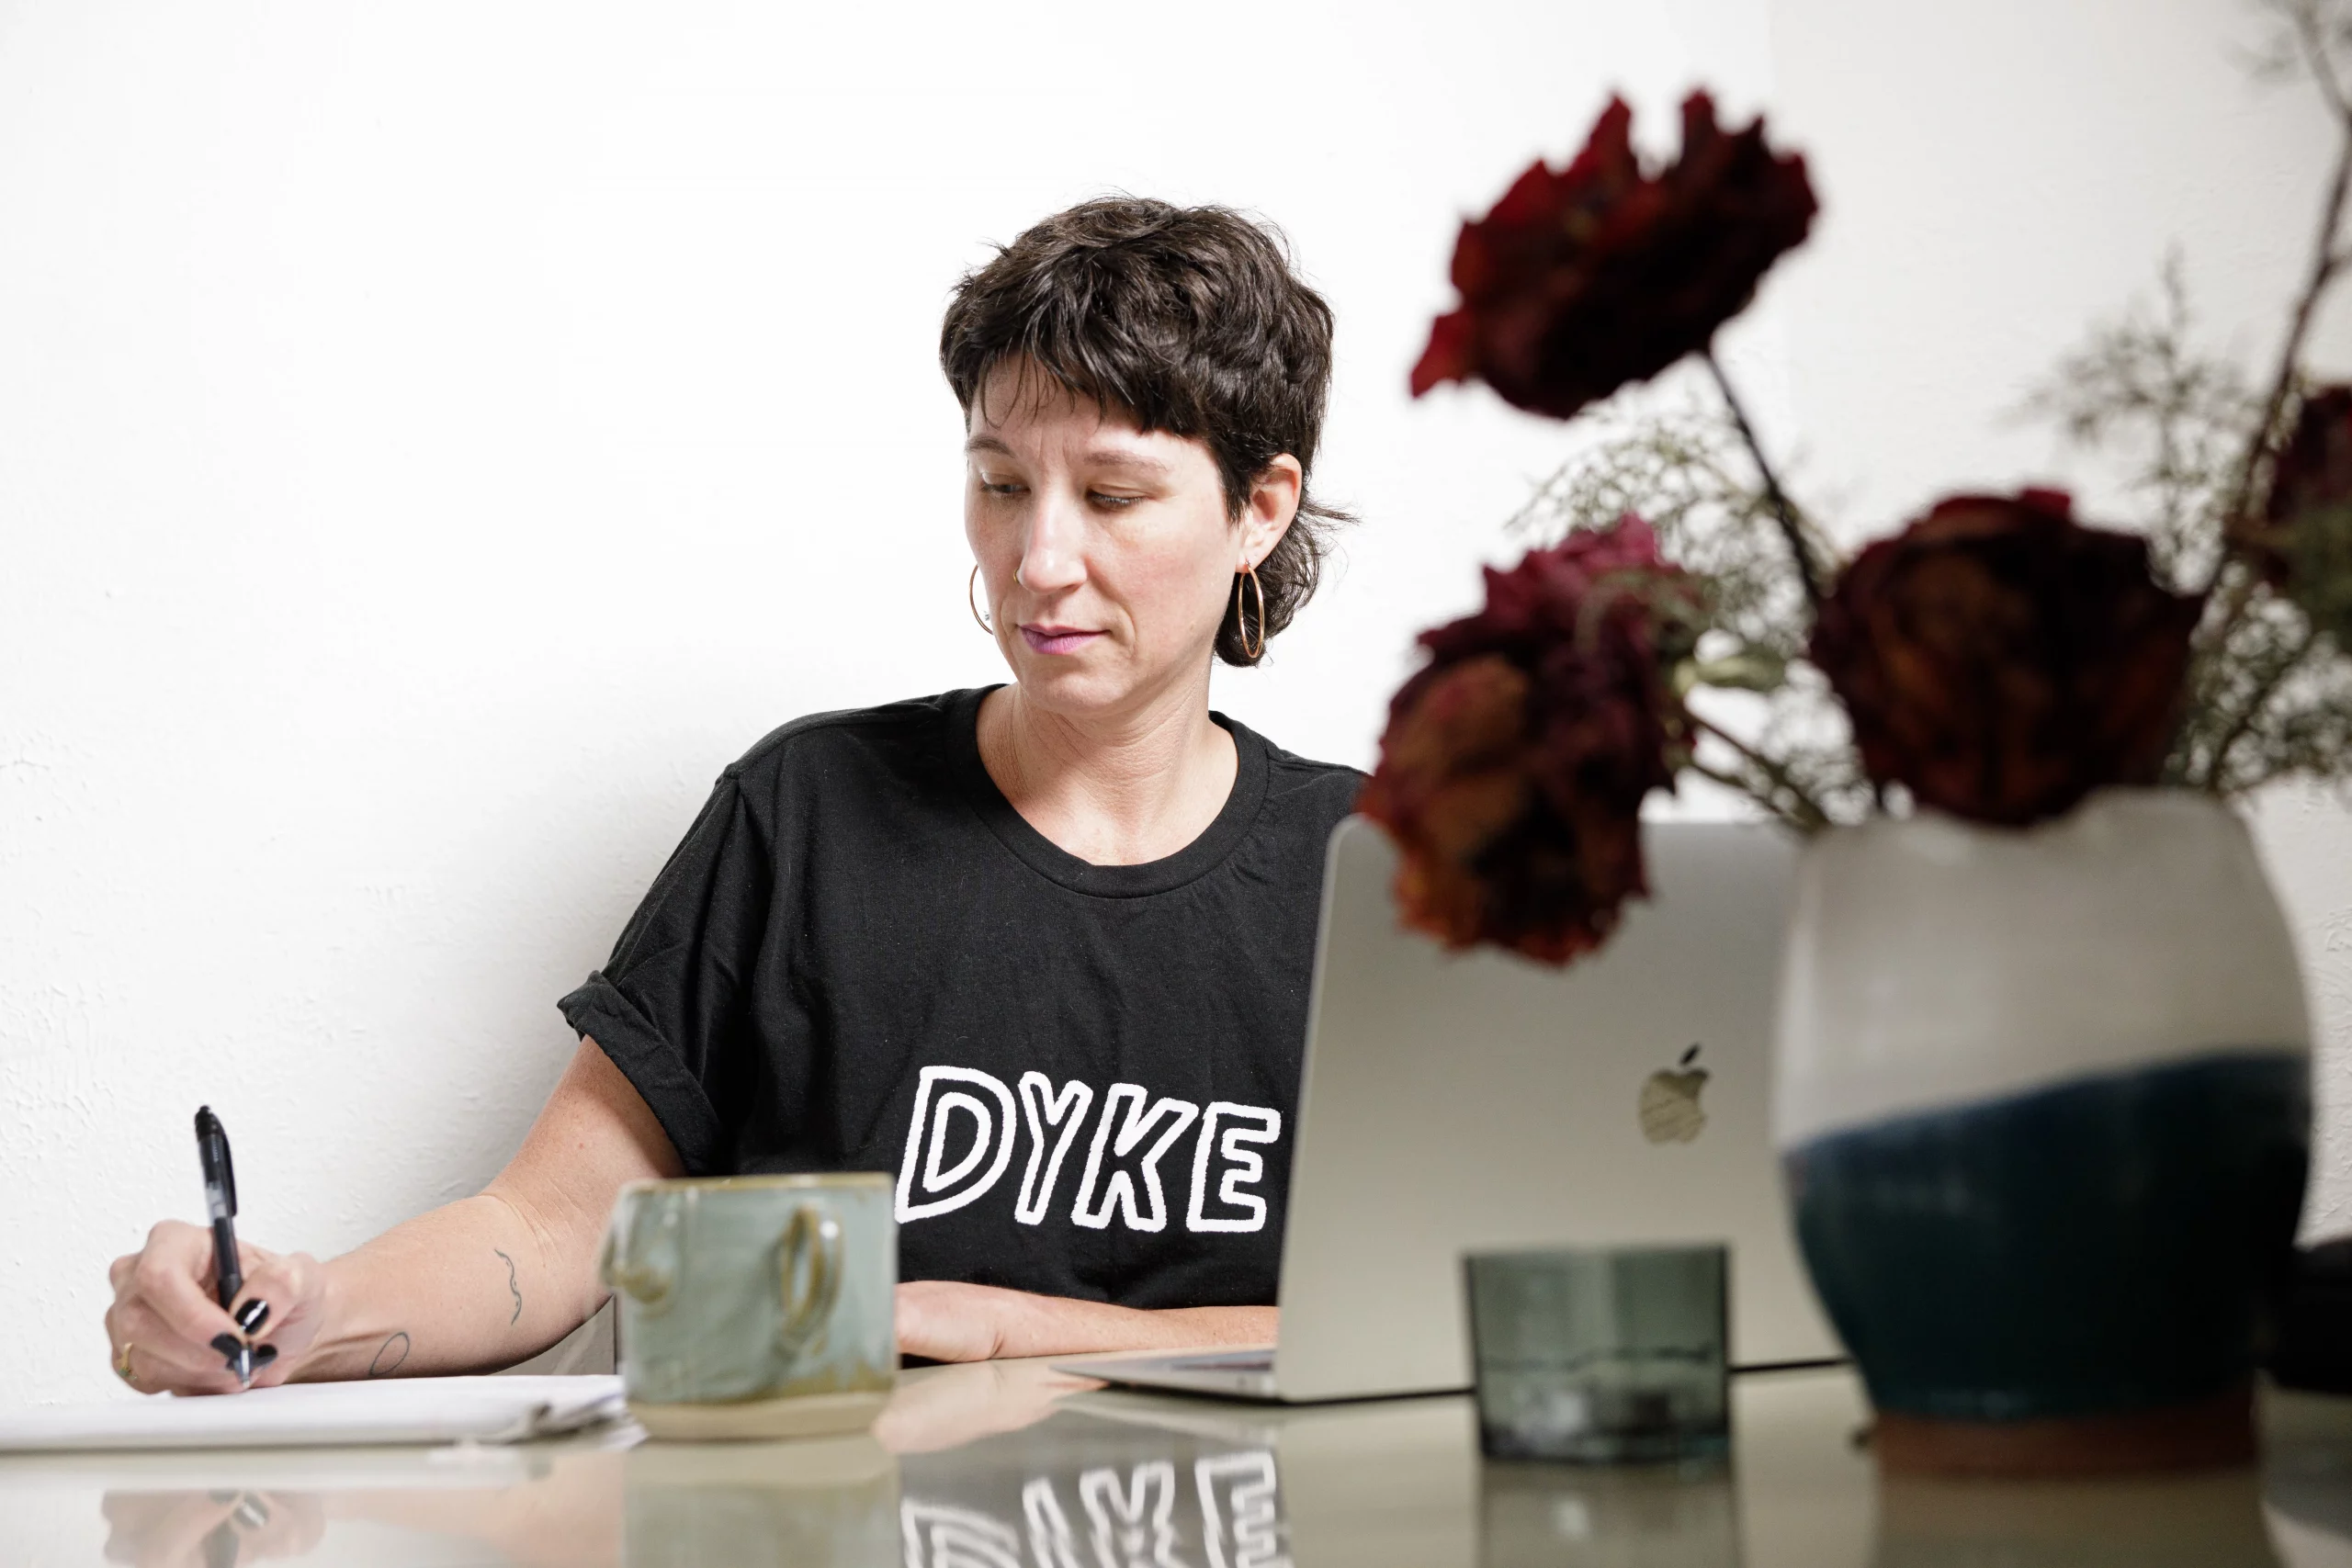 Amanda Madden writes at a table with flowers in front of them, wearing a shirt that reads DYKE.